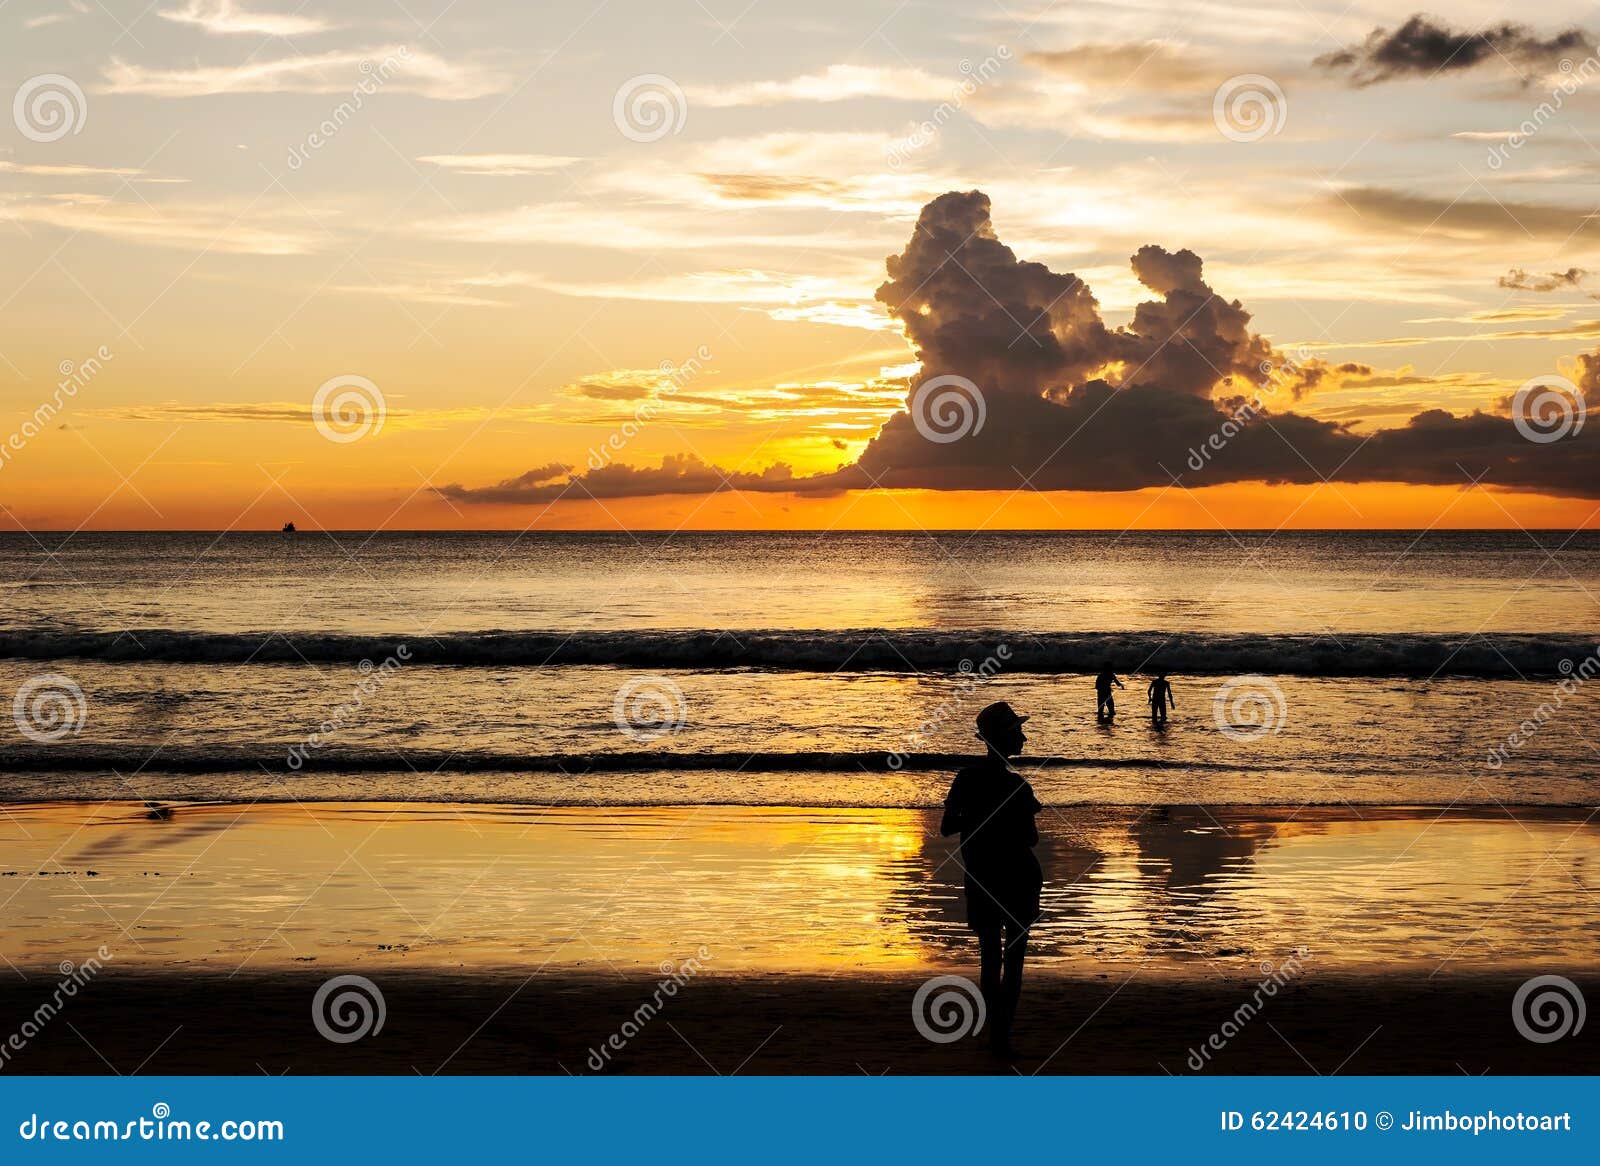 Silhouette People Relax on the Beach Stock Photo - Image of phuket ...